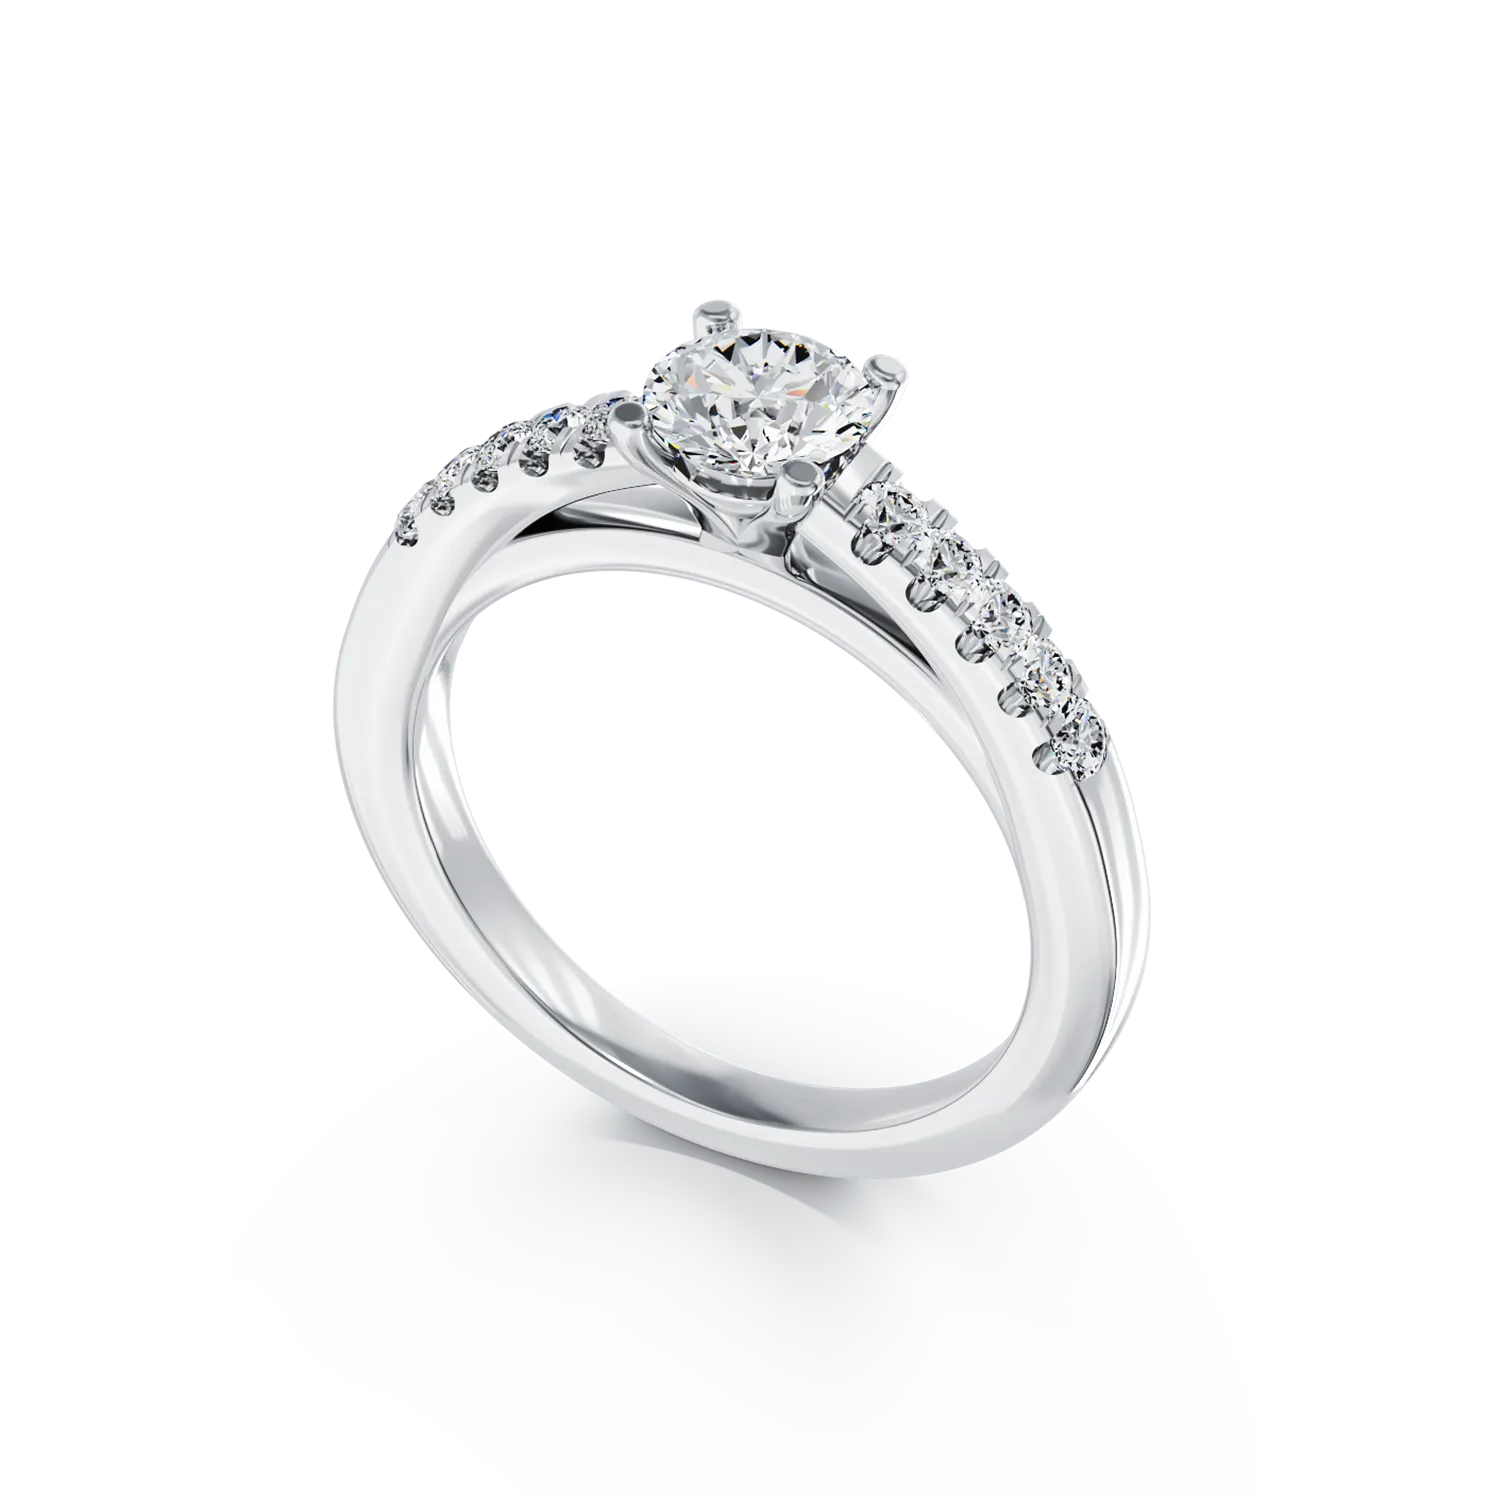 18k white gold engagement ring with 0.51ct diamond and 0.13ct diamonds